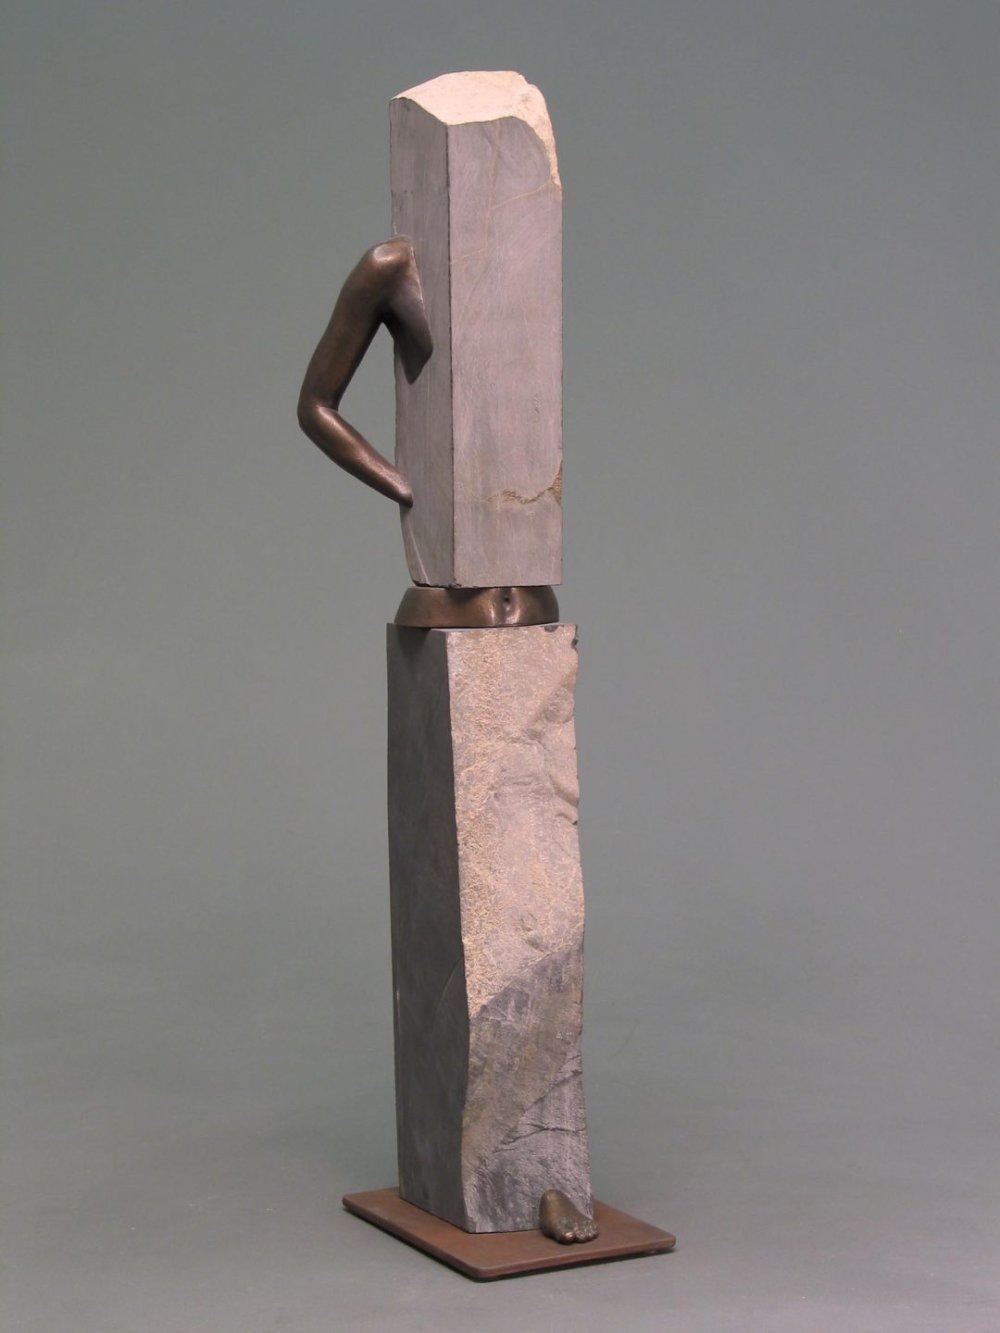 Intriguing Bronze And Stone Sculptures By Bryon Draper 8